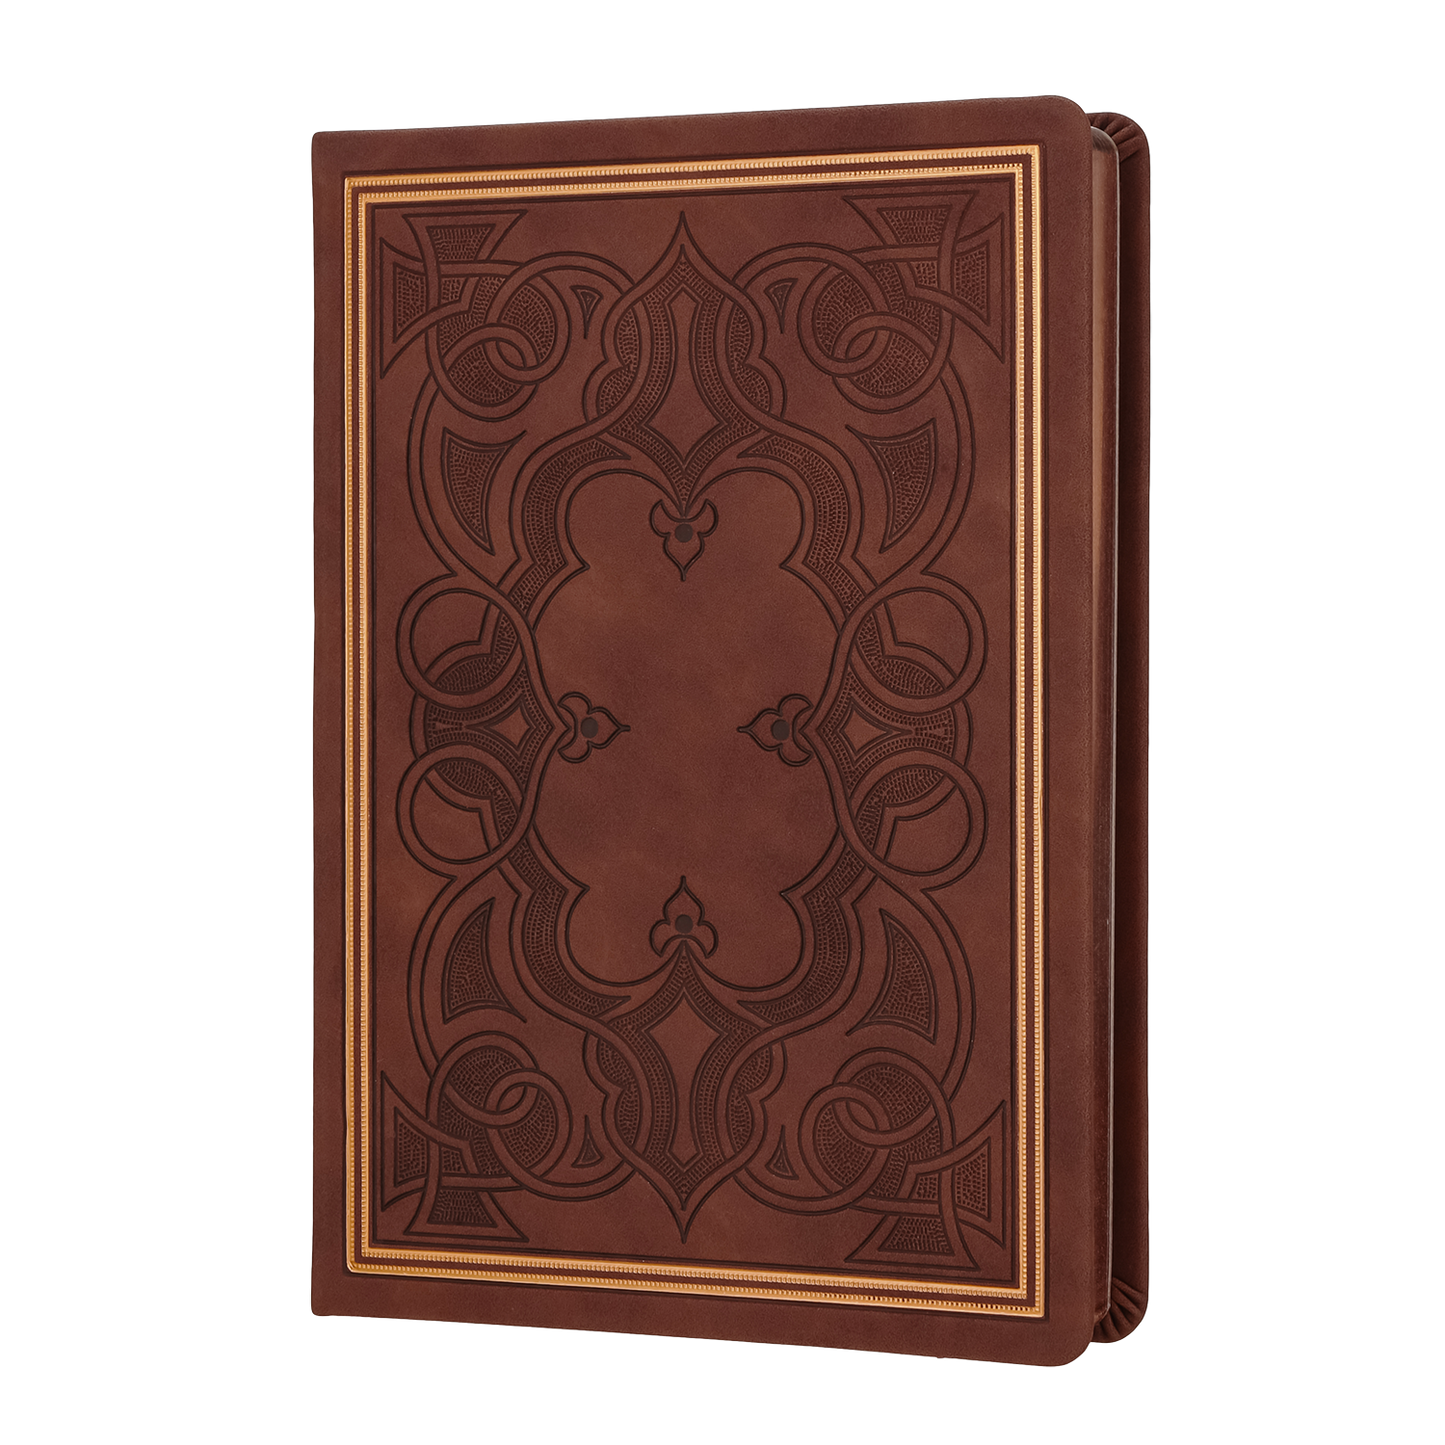 Victoria's Journals Vintage Style Diary – Daily Affirmations or a Prayer Journal 320p. (Chocolate Brown)